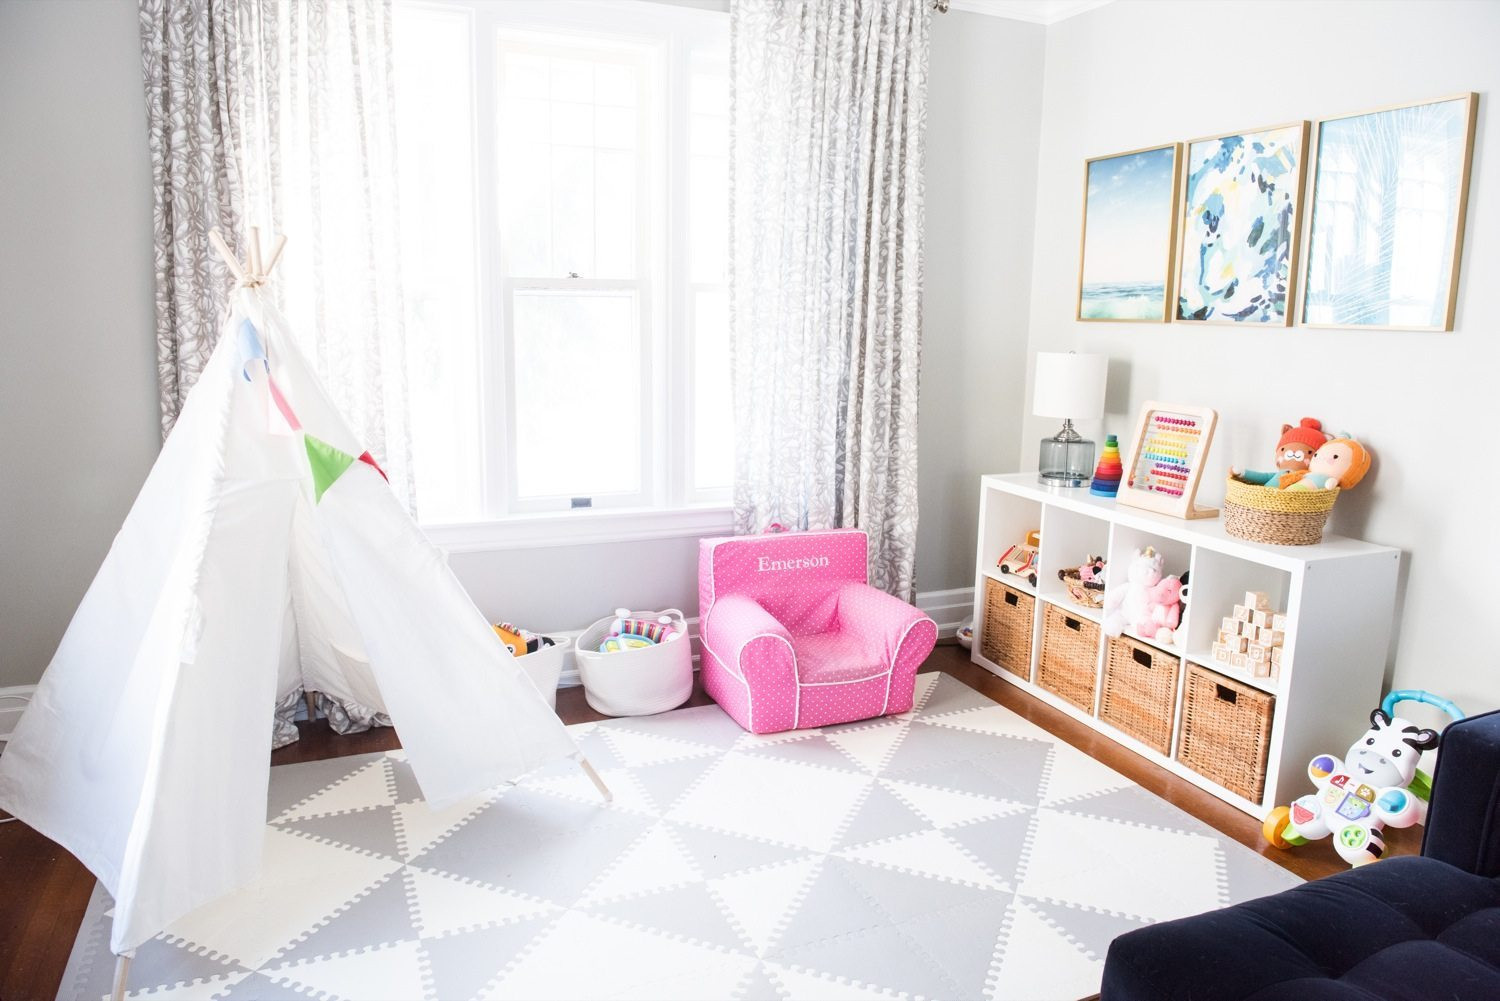 Modern Kids Play Room
 Emerson s Modern Playroom Tour The Sweetest Occasion